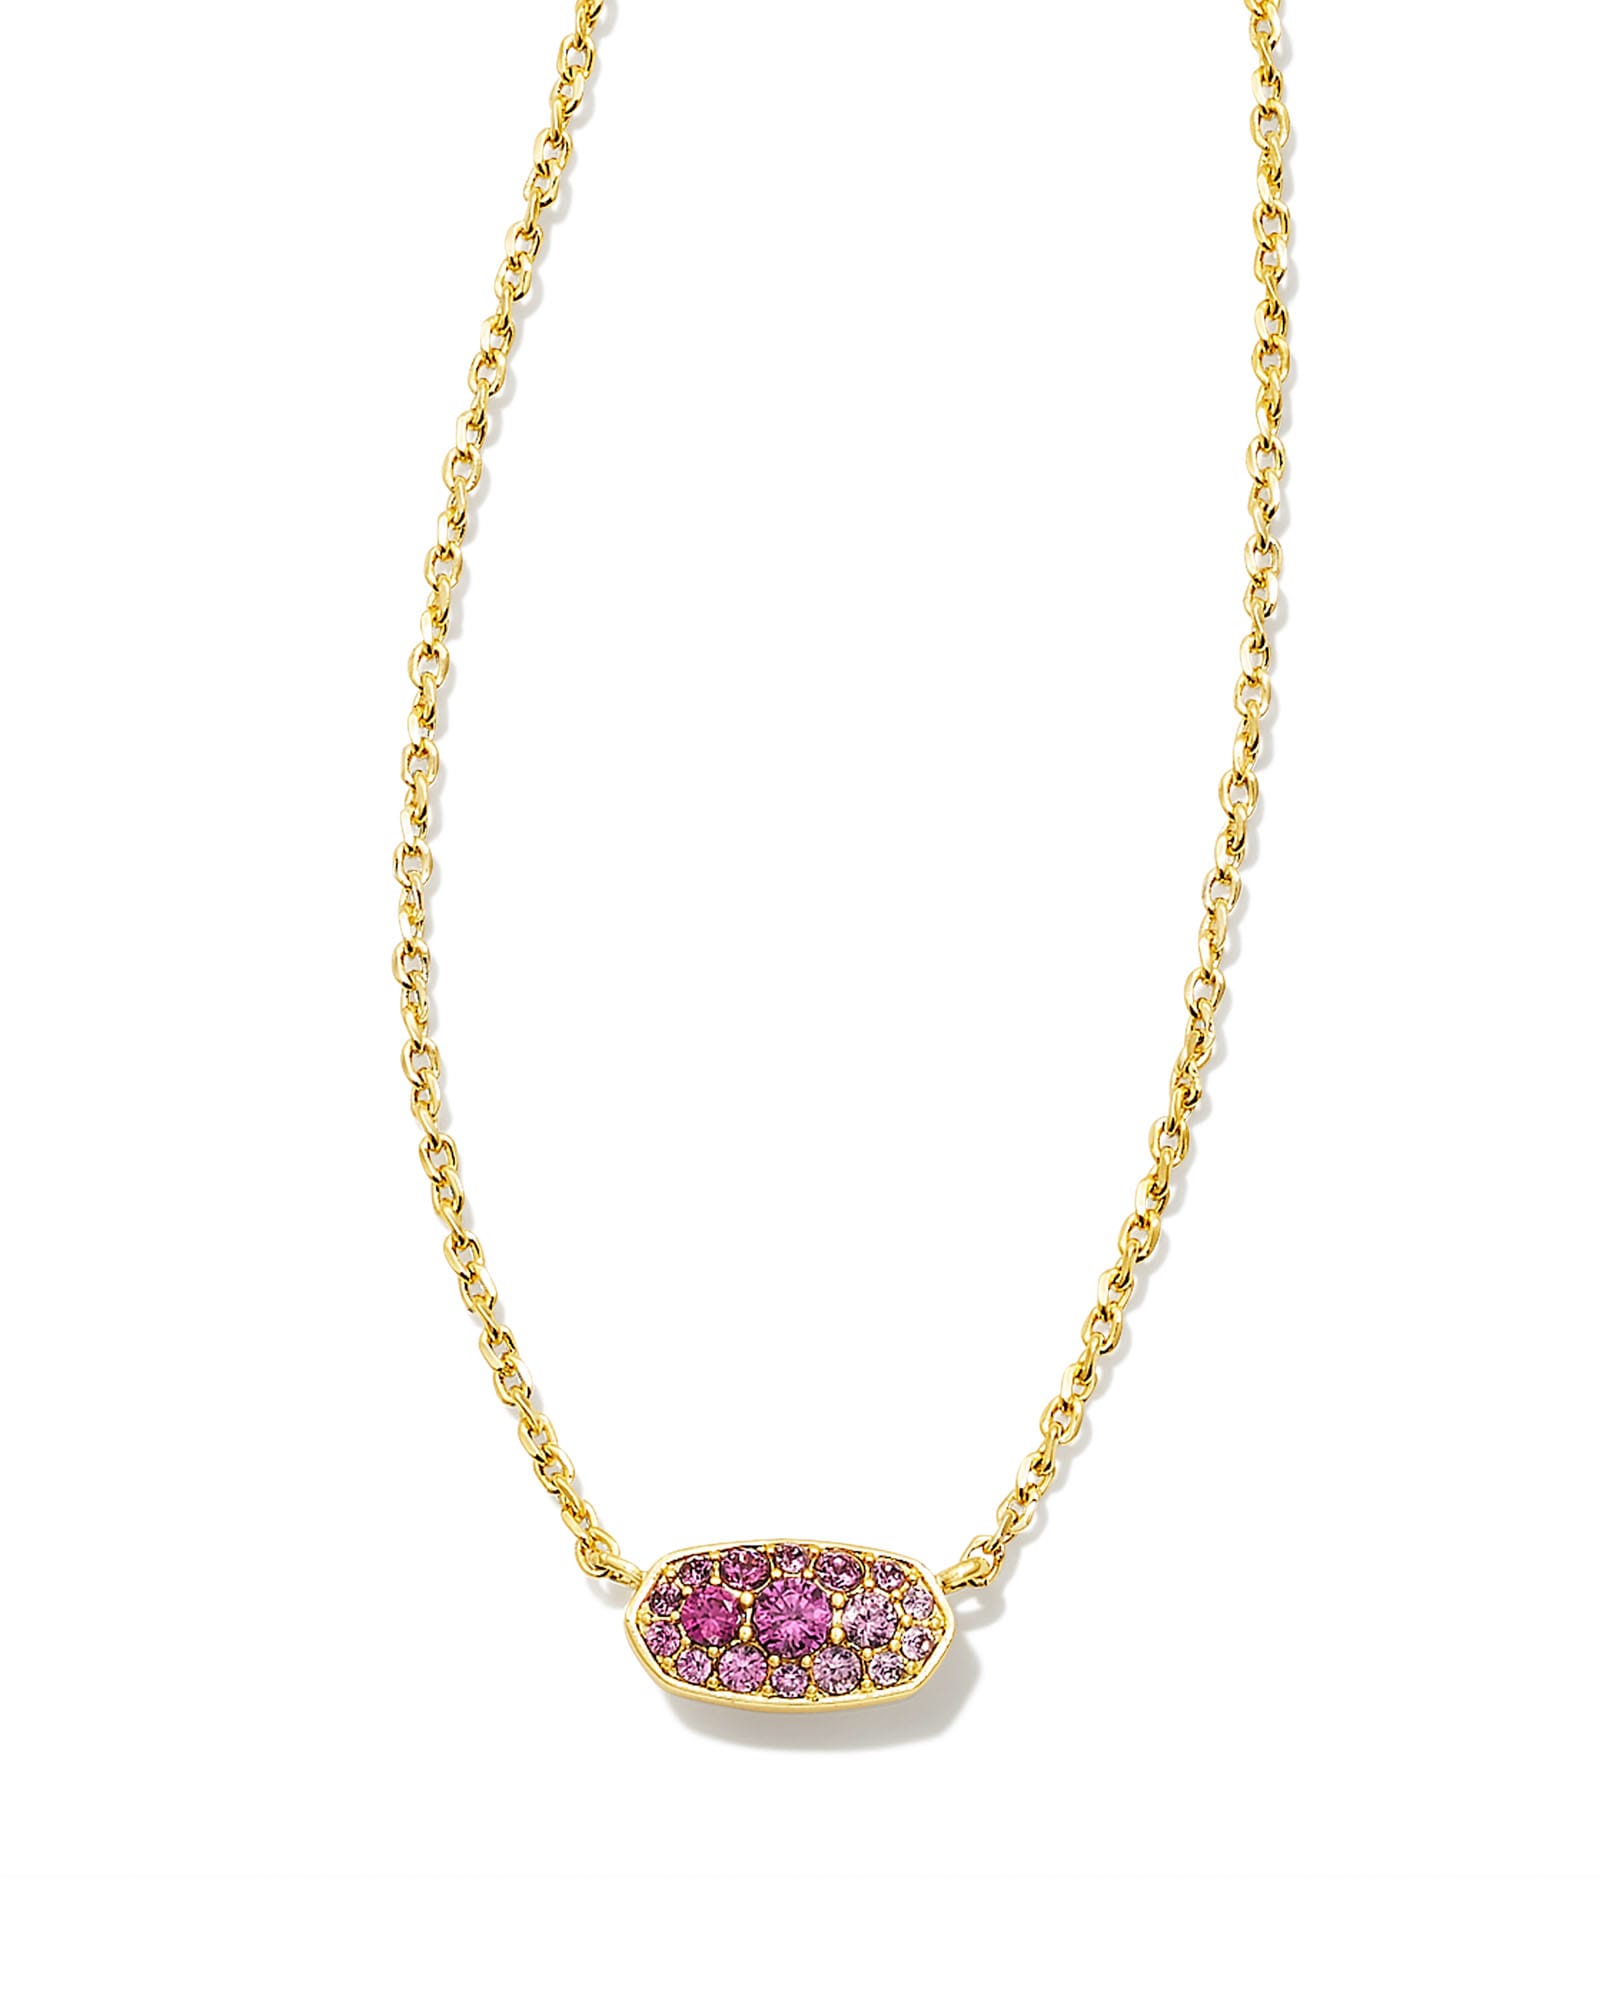 Grayson Gold Crystal Pendant Necklace in Pink Ombre | Kendra Scott